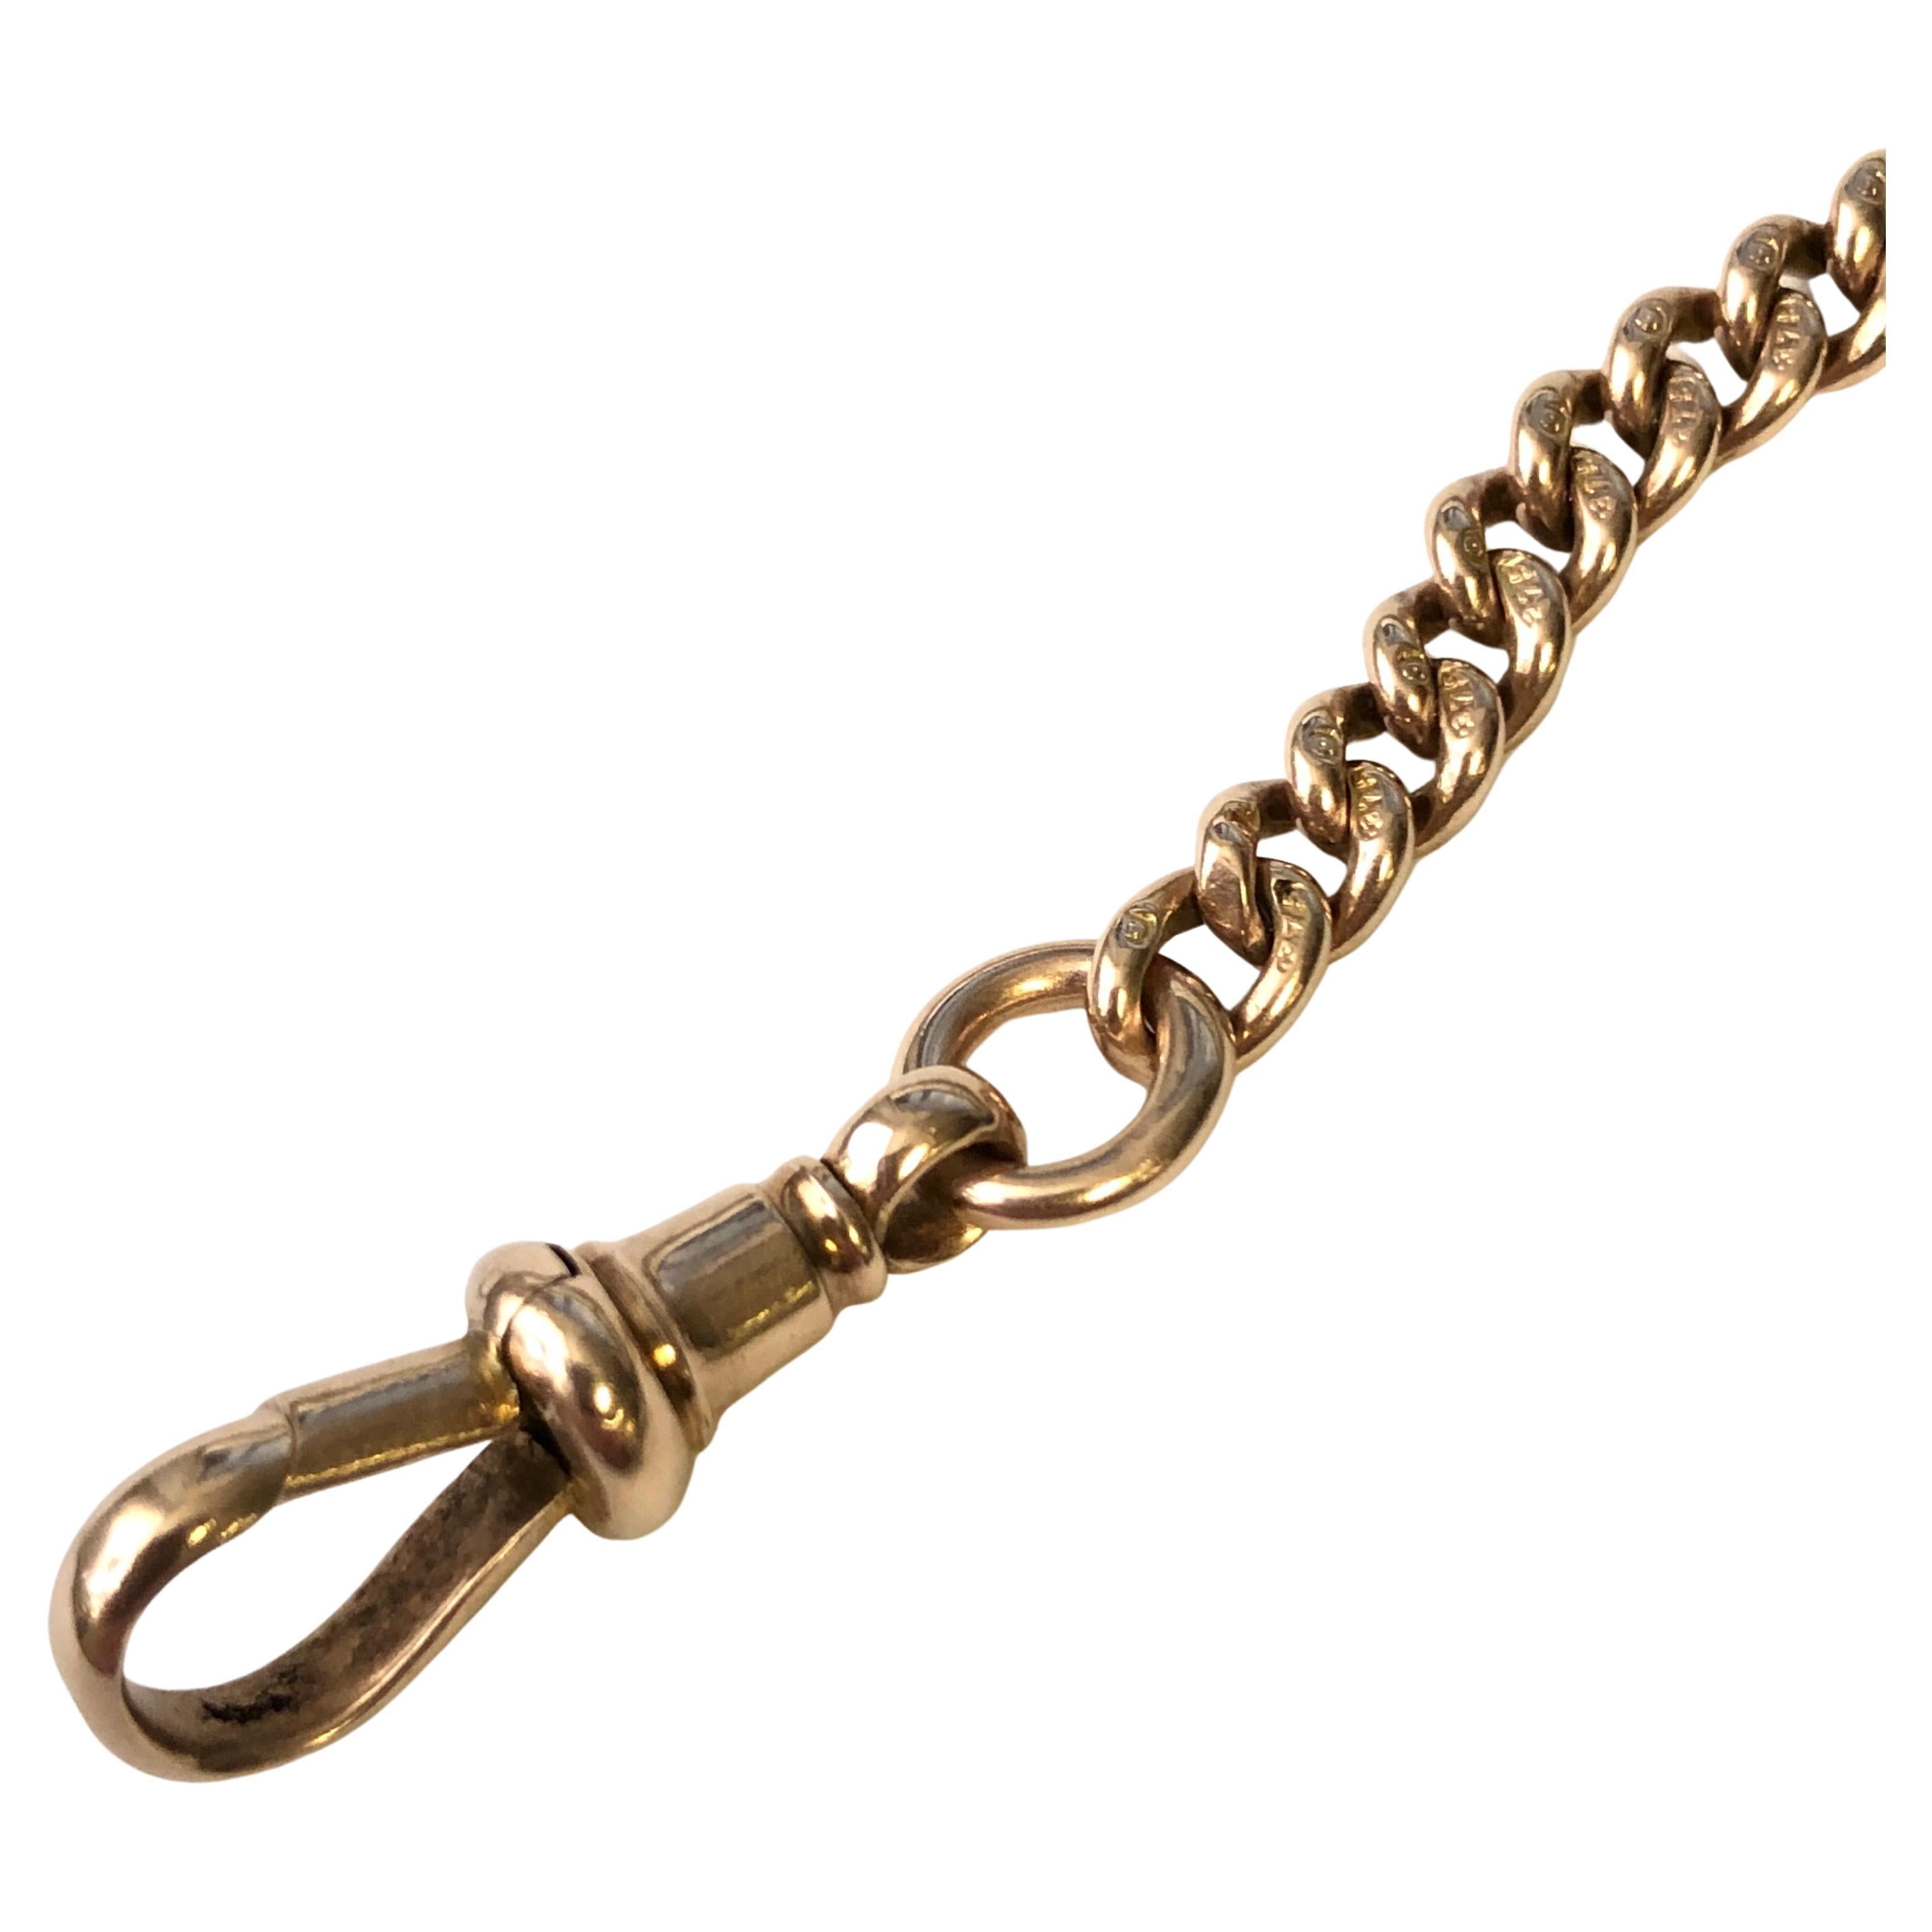 Hand made solid Rose gold vintage fob chain, each link marked 9 carat.
Total length of the chain is 36 cm (14,7 inches).
Fitted with two swivel clips
Weight of the chain is 40.29 grams
Fob chains where originally used for securing a pocket-watch,